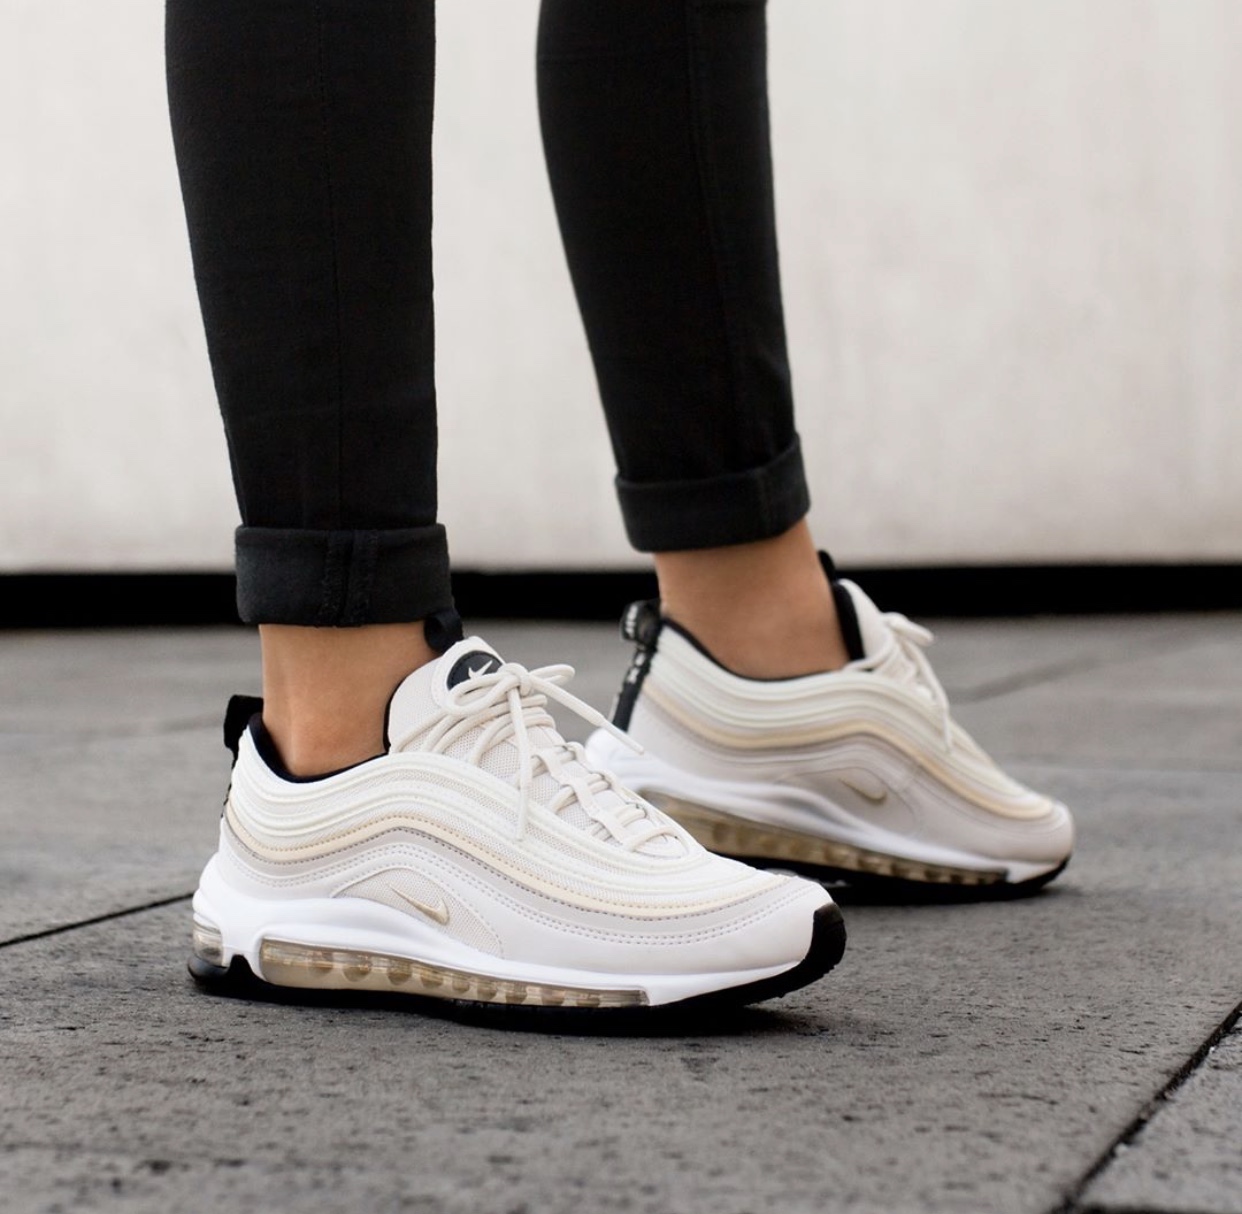 The Nike Air Max 97 Has Arrived In A 